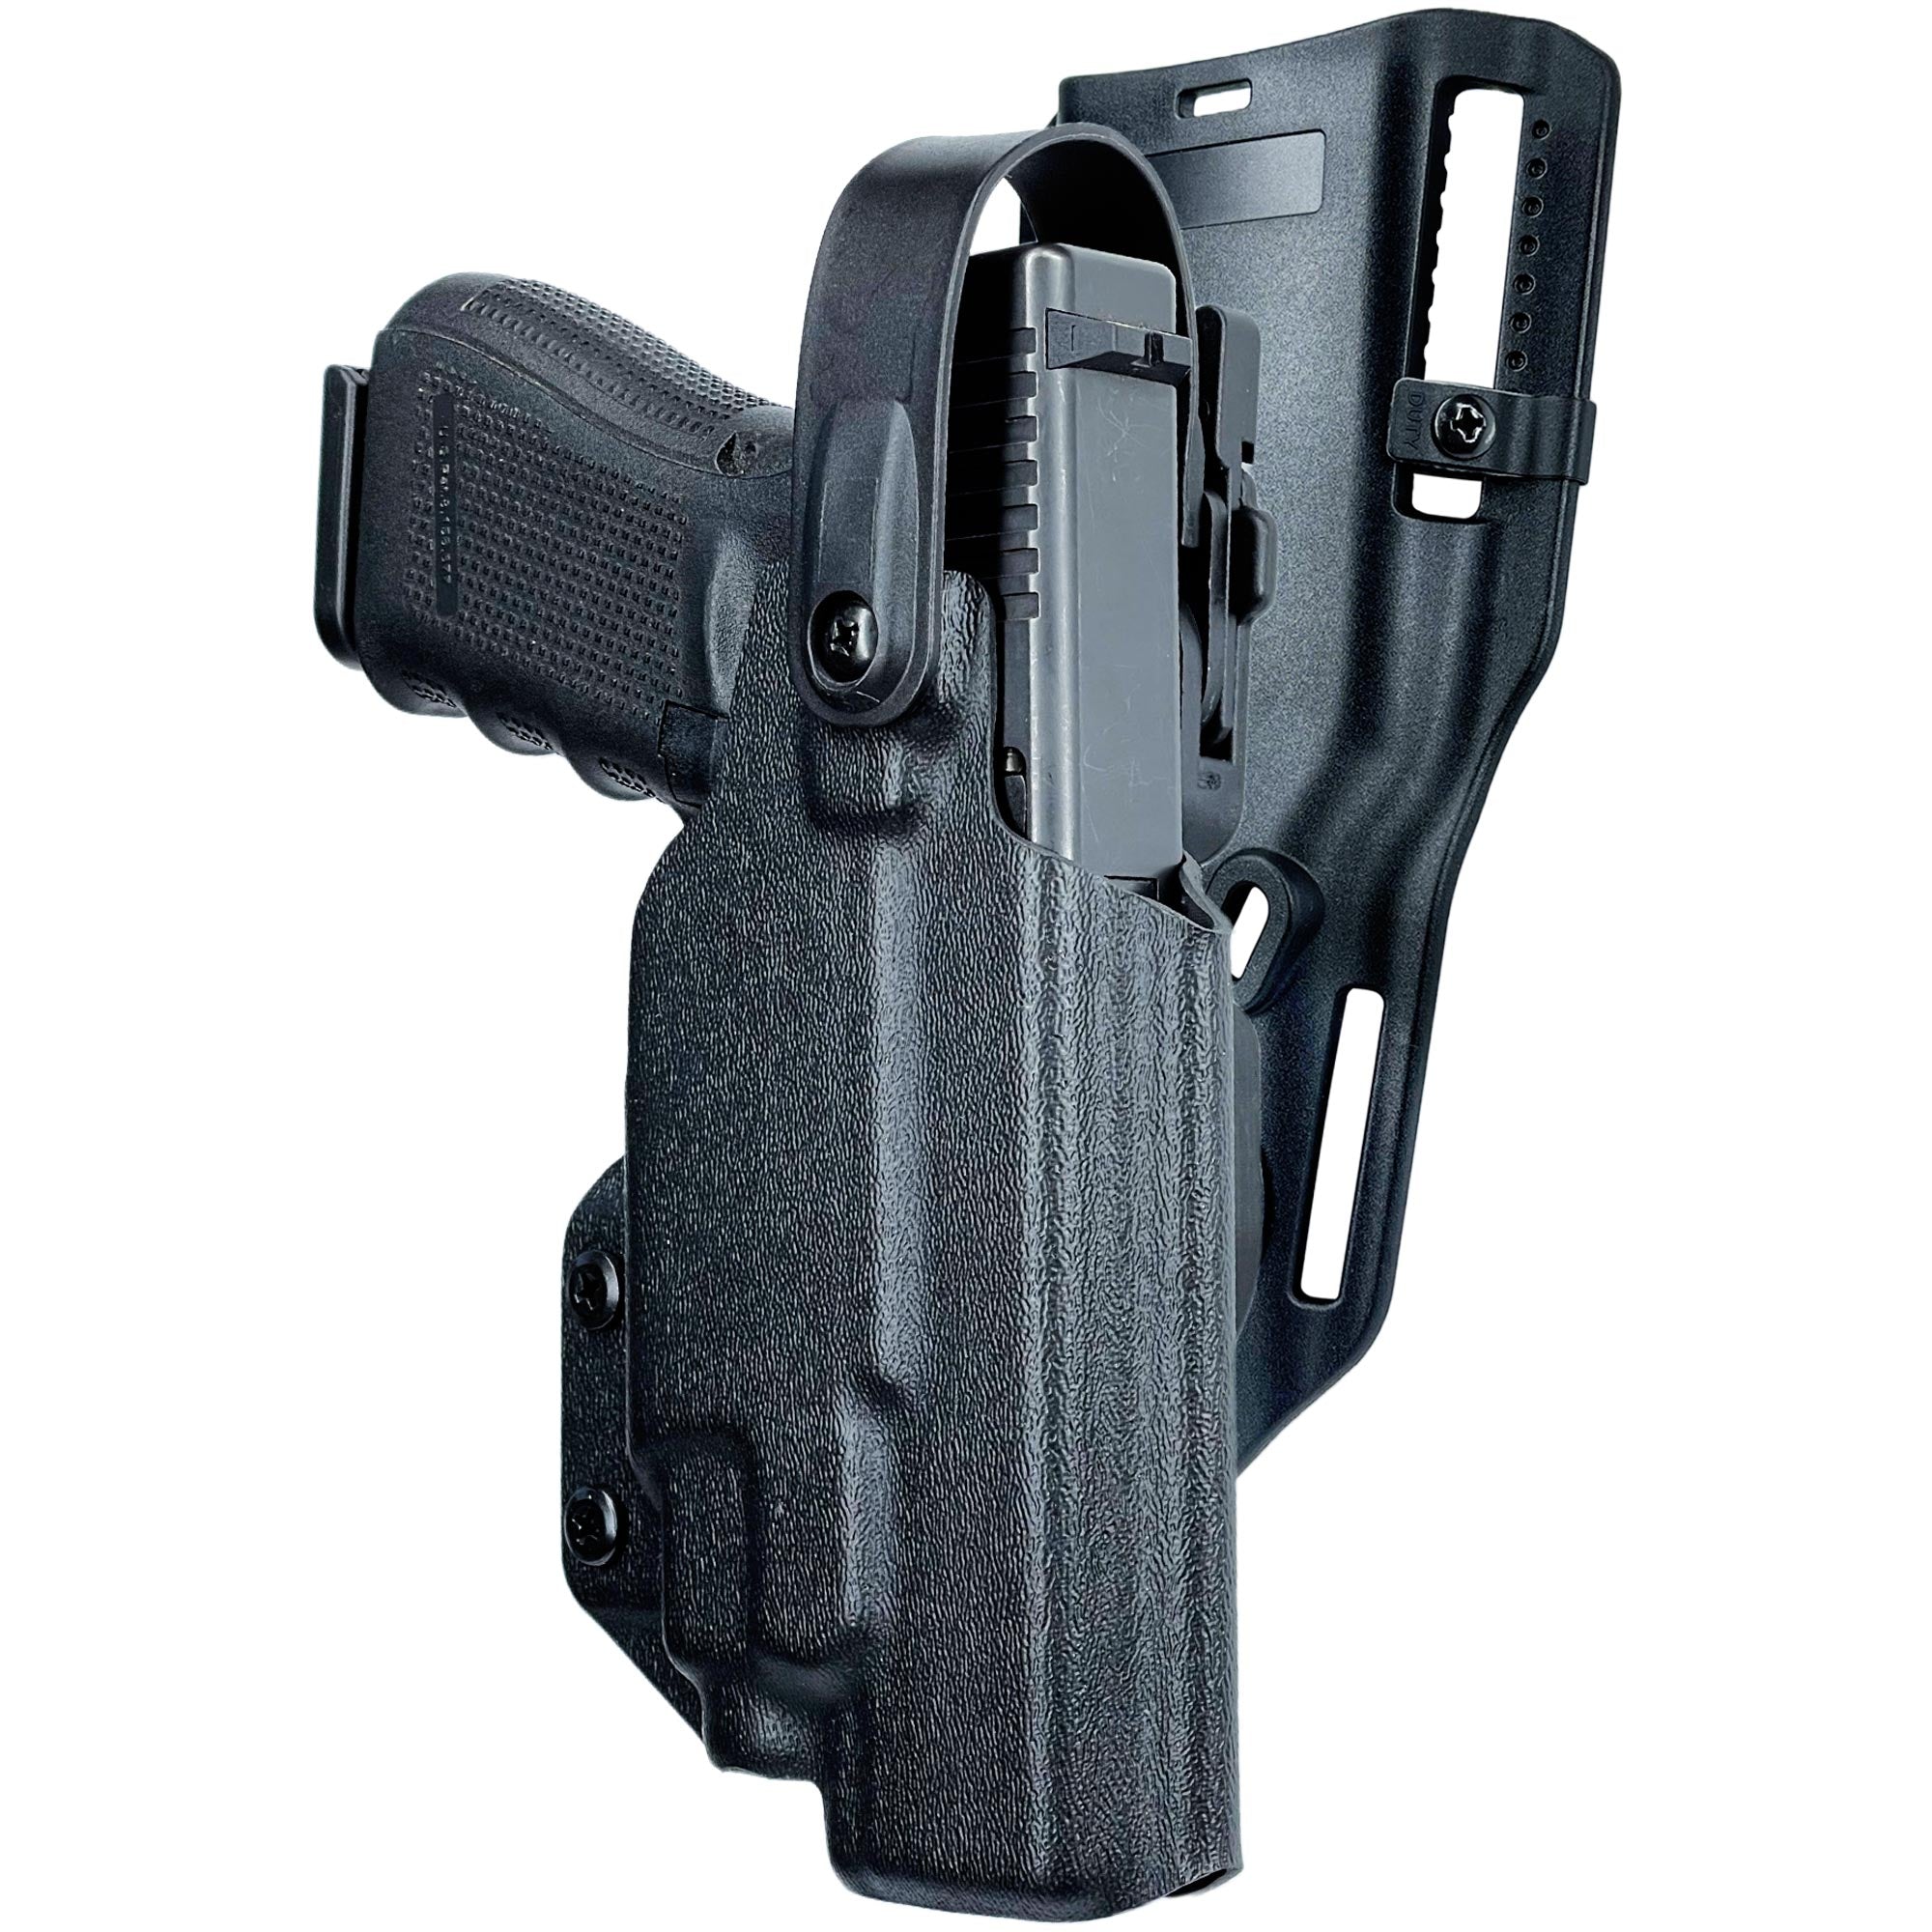  Level II/III Duty Holster Compatible with Glock  17/19/19x/23/31/32/45(Gen1-5), G22(Gen1-4), Holster for Duty Belt, Not Fit  G22 Gen5,Ride Height Adjustable, Kydex&Polymer Available, Material Optional  : Sports & Outdoors